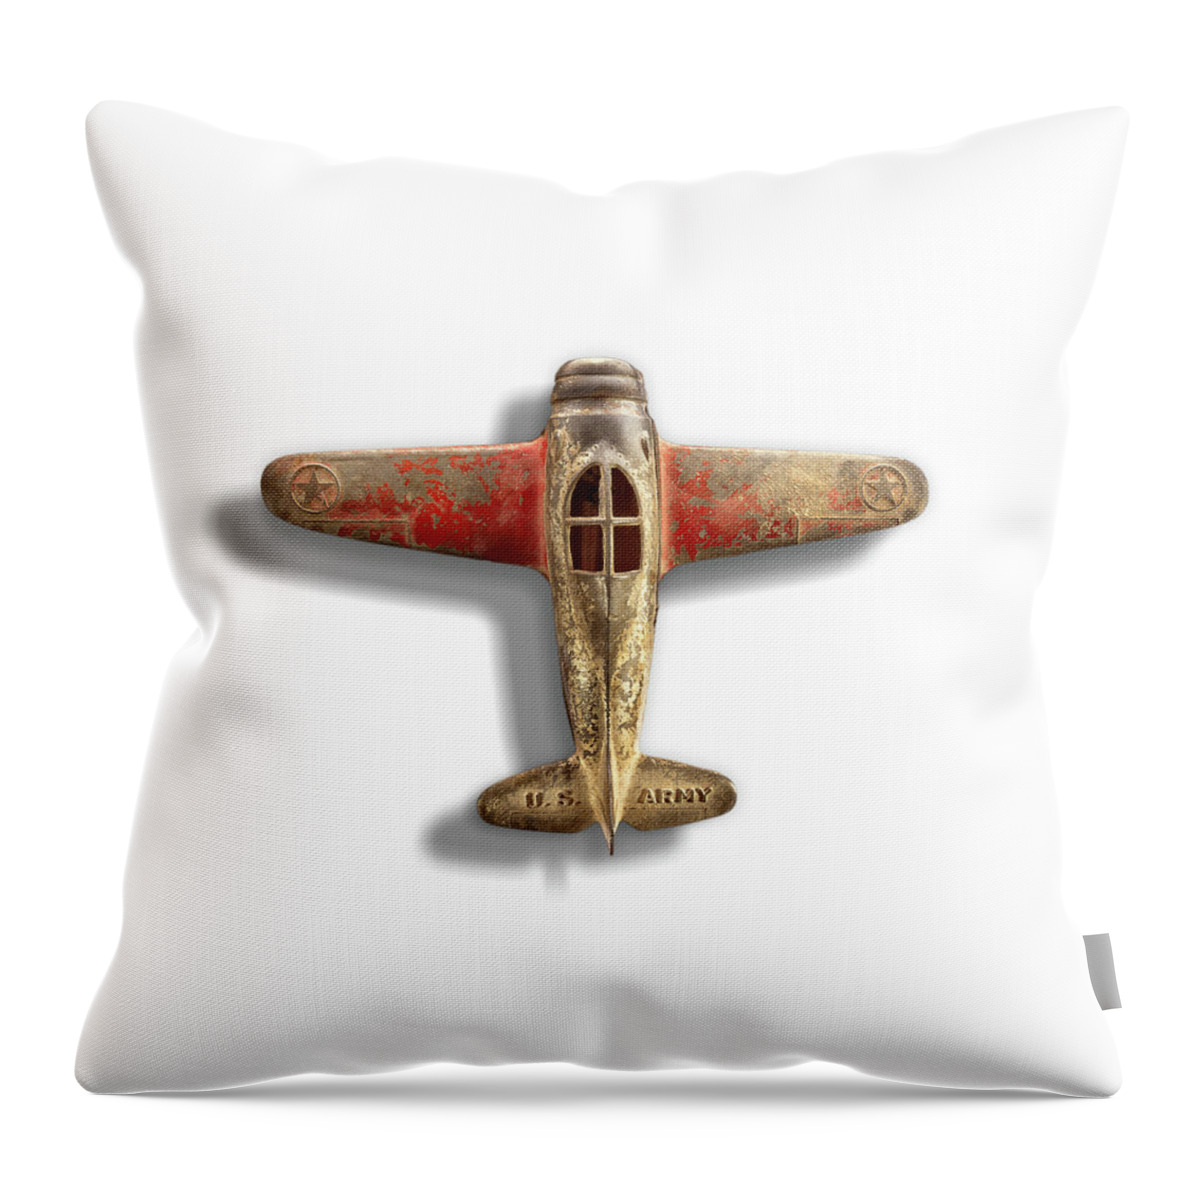 Antique Toy Throw Pillow featuring the photograph Antique Toy Airplane Floating On White by YoPedro